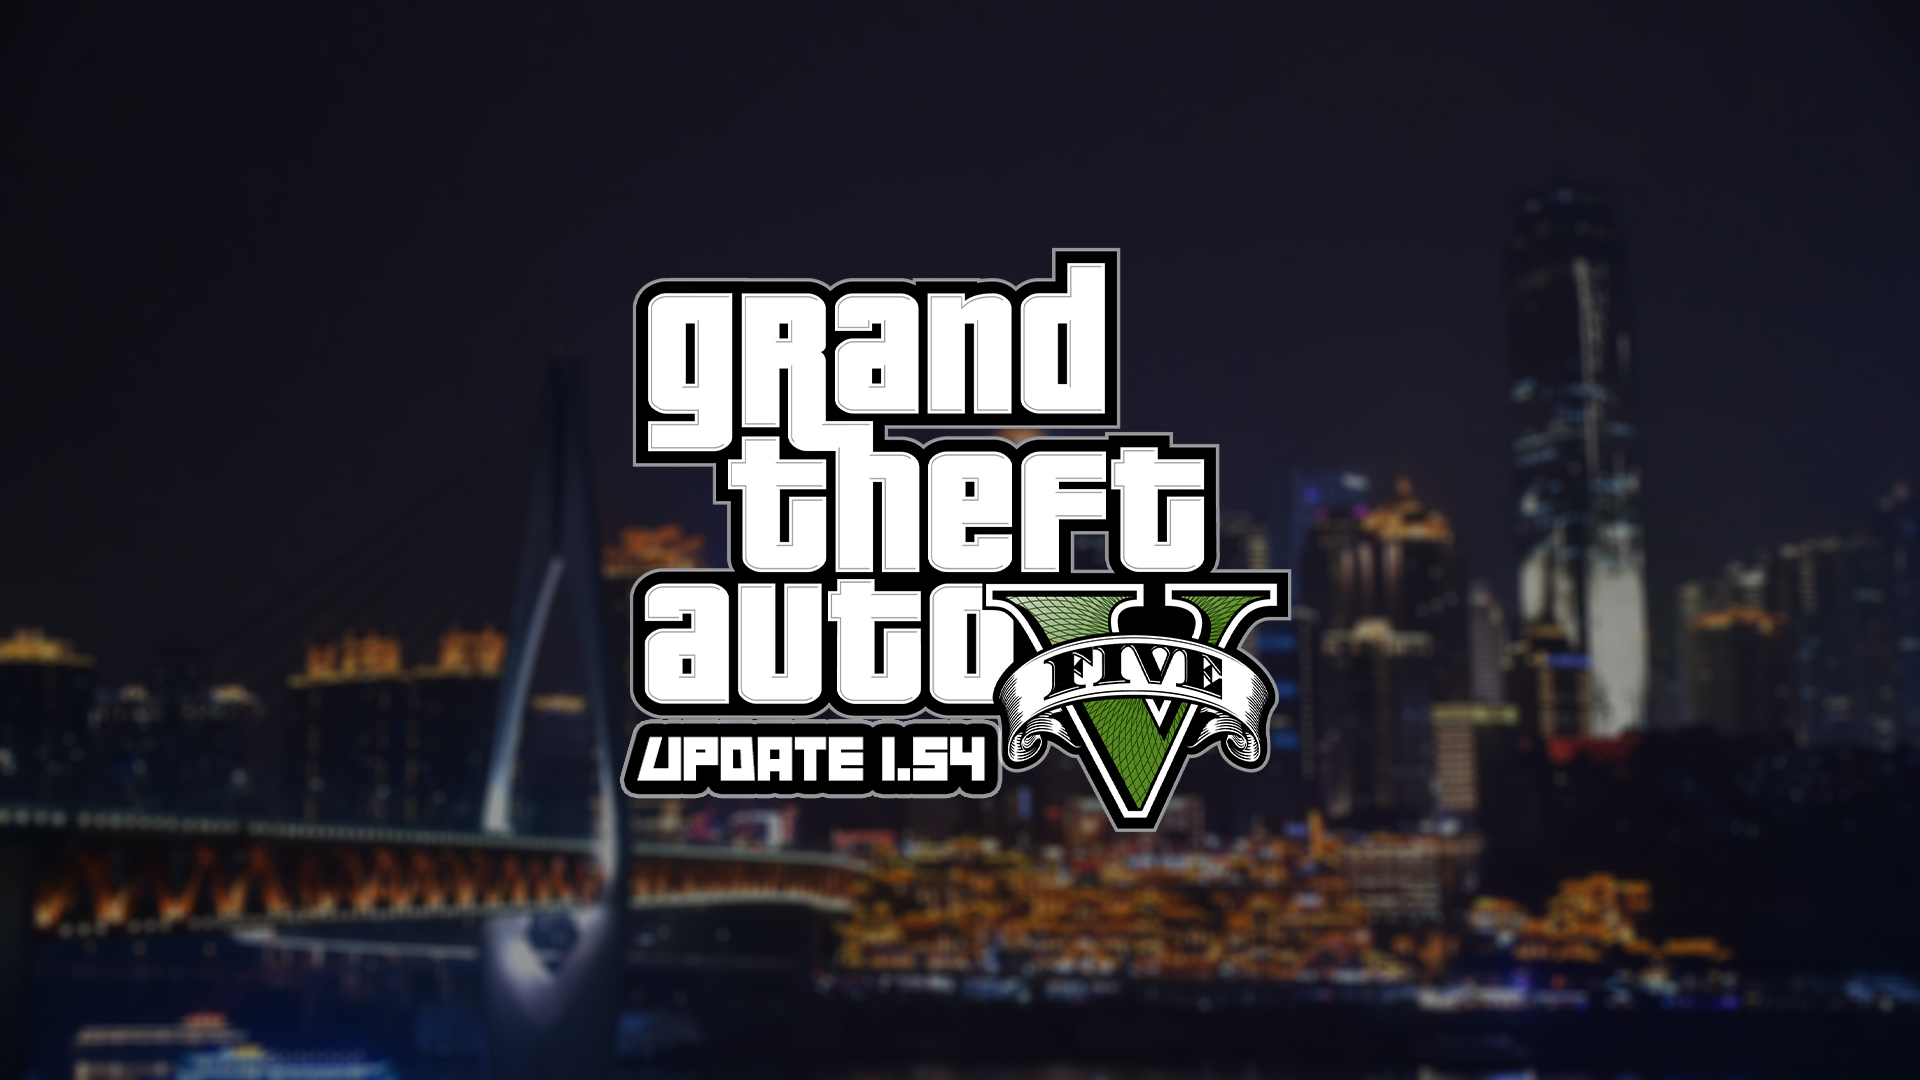 gta 5 update 1.54 patch notes gta v update 1.54 gta 5 patch 1.54 gta 5 1.54 download gta 5 1.54 indir gta 5 1.54 money glitch gta v 1.54 mod menu can you get banned for gta money glitches how to do the gta money glitch are there any gta money glitches are there any working gta money glitches gta 5 1.54 patch notes gta 5 1.54 trainer gta 5 newswire double money gta 5 news this week gta 5 news van gta 5 news 2021 gta 5 news helicopter gta 5 newsletter 200k gta 5 news twitter gta 5 newswire reddit gta 5 newswire gta 5 news radio stations gta 5 news station gta 5 news and updates gta 5 news articles gta 5 news april 2020 gta 5 news august 2020 gta 5 android news gta v all news gta 5 all weazel news gta 5 aktuelle news gta 5 news bot discord gta 5 news building gta v news building gta 5 bbc news gta v bad news gta 5 news bonus b gta 5 gta 5 news channel gta 5 news cars gta 5 news chopper gta 5 news casino gta v news cars gta v news chopper gta v current news gta 5 news shark card gta 5 news double money gta 5 news dlc gta 5 news discounts gta 5 news discord gta 5 news december 2020 gta 5 news deutsch new dlc gta 5 news d gta 5 d gta v d gta gta 5 event news gta 5 enhanced news epic games gta 5 news gta 5 premium edition top news gta 5 news eventwoche gta 5 online news english gta v news español gta 5 news feed gta 5 news free gta 5 news for android gta 5 news forum gta 5 news fr gta 5 fox news gta v free news gta v fake news gta 5 glitch news gta 5 ghost news gta 5 rockstar games news gta 5 next gen news gta 5 epic games news gta v next gen news gta v epic games news rockstar games gta 5 news deutsch gta 5 news hindi gta 5 news heute gta 5 heist news gta 5 weazel news helicopter gta v mods news helicopter gta 5 casino heist news gta 5 news ign gta 5 online news gta 5 weazel news interior gta 5 news june 2020 gta 5 newsletter gta 5 weazel news location gta 5 real life news gta 5 weazel news van location weazel news gta 5 location on map gta 5 loading screen news gta 5 news de la semaine gta 5 news money gta 5 news mod gta 5 news may 2020 gta v news map gta 5 mobile news gta v mobile news gta v money news gta 5 news november 2020 gta 5 new news gta 5 news online gta 5 online news reddit gta 5 online news twitter gta v official news gta 5 mobile official news gta 5 online weazel news van gta 5 on news what's happening to gta 5 gta 5 news ps5 gta 5 news ps4 gta 5 newspaper gta v pc news gta 5 cayo perico news gta 5 twitch prime news gta v on phone news gta v cayo perico news gta 5 news rockstar gta 5 news reddit gta 5 news radio gta 5 news reports gta v news radio station gta v news reports gta 5 remastered news gta 5 news social club gta 5 news september 2020 gta 5 news story mode gta 5 news semaine gta 5 weazel news script gta 5 news today gta v news this week gta v news twitter what's new in gta 5 this week gta 5 news update gta v upcoming news is there a gta 5 update today gta 5 newswire ign gta v news week gta 5 weazel news gta 5 weazel news van gta 5 news xbox one gta 5 online xbox news is gta 5 different on xbox one gta 5 news 1 million how to get 1 million gta 5 how to get 1 million gta v how to get 1 million gta how to make 1 million in gta 5 gta 5 news 2020 gta 5 news 2019 gta 5 ps5 news will gta 5 work on ps5 will gta 5 be on ps5 will gta v be on ps5 is gta 5 going to be on ps5